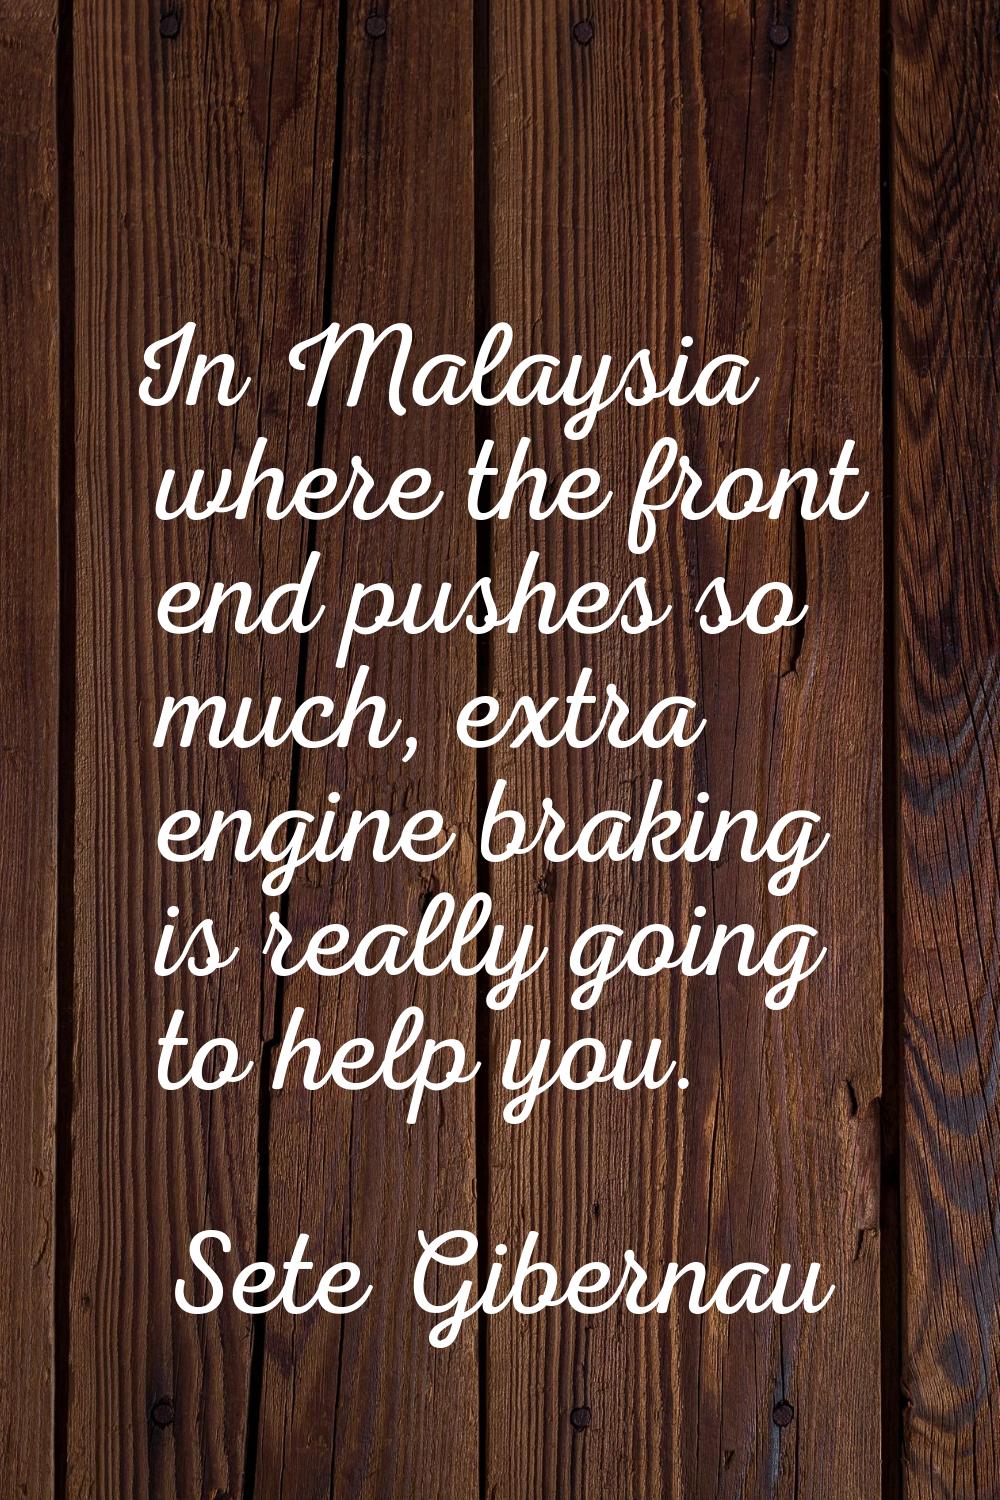 In Malaysia where the front end pushes so much, extra engine braking is really going to help you.